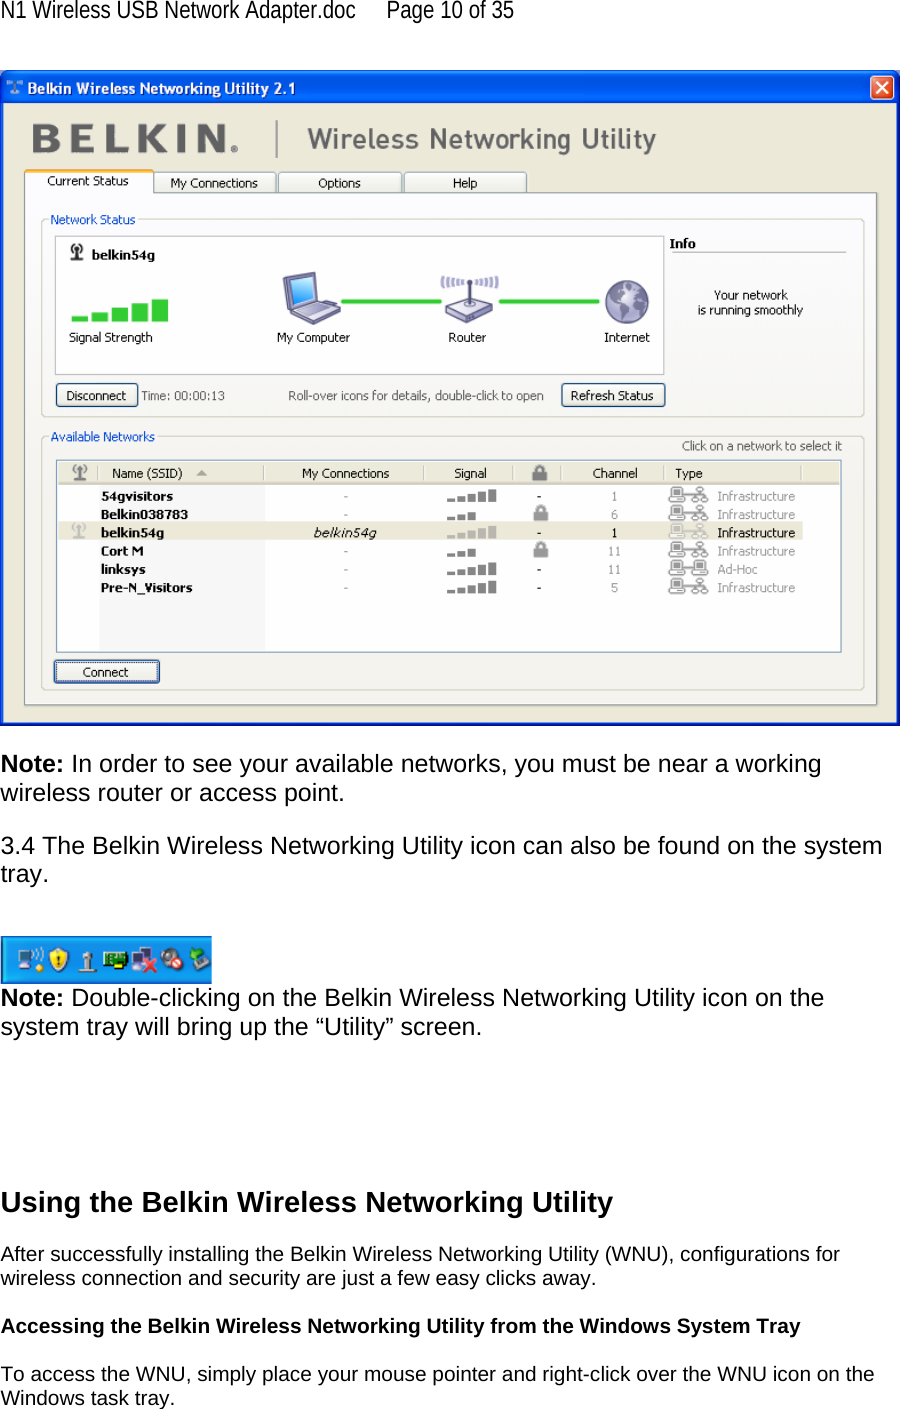 N1 Wireless USB Network Adapter.doc  Page 10 of 35   Note: In order to see your available networks, you must be near a working wireless router or access point.  3.4 The Belkin Wireless Networking Utility icon can also be found on the system tray.    Note: Double-clicking on the Belkin Wireless Networking Utility icon on the system tray will bring up the “Utility” screen.       Using the Belkin Wireless Networking Utility   After successfully installing the Belkin Wireless Networking Utility (WNU), configurations for wireless connection and security are just a few easy clicks away.  Accessing the Belkin Wireless Networking Utility from the Windows System Tray  To access the WNU, simply place your mouse pointer and right-click over the WNU icon on the Windows task tray.  